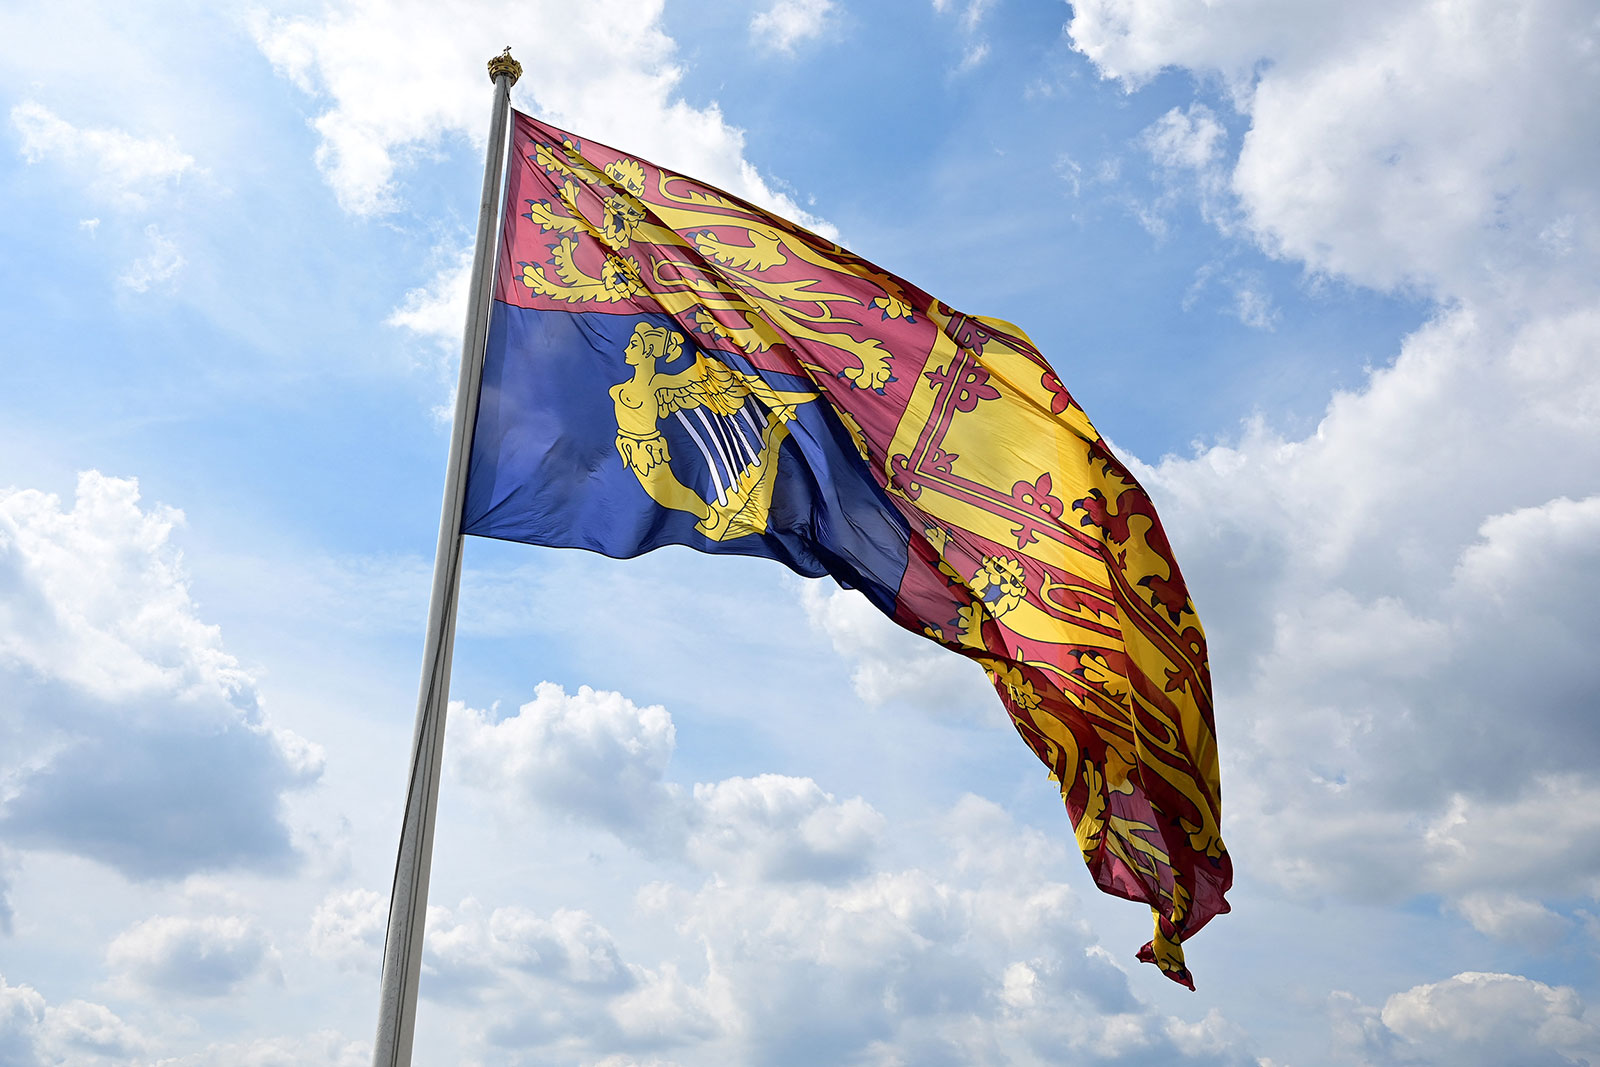 The Royal Standard flag is pictured flying from the Roof of Buckingham Palace in London on June 2.